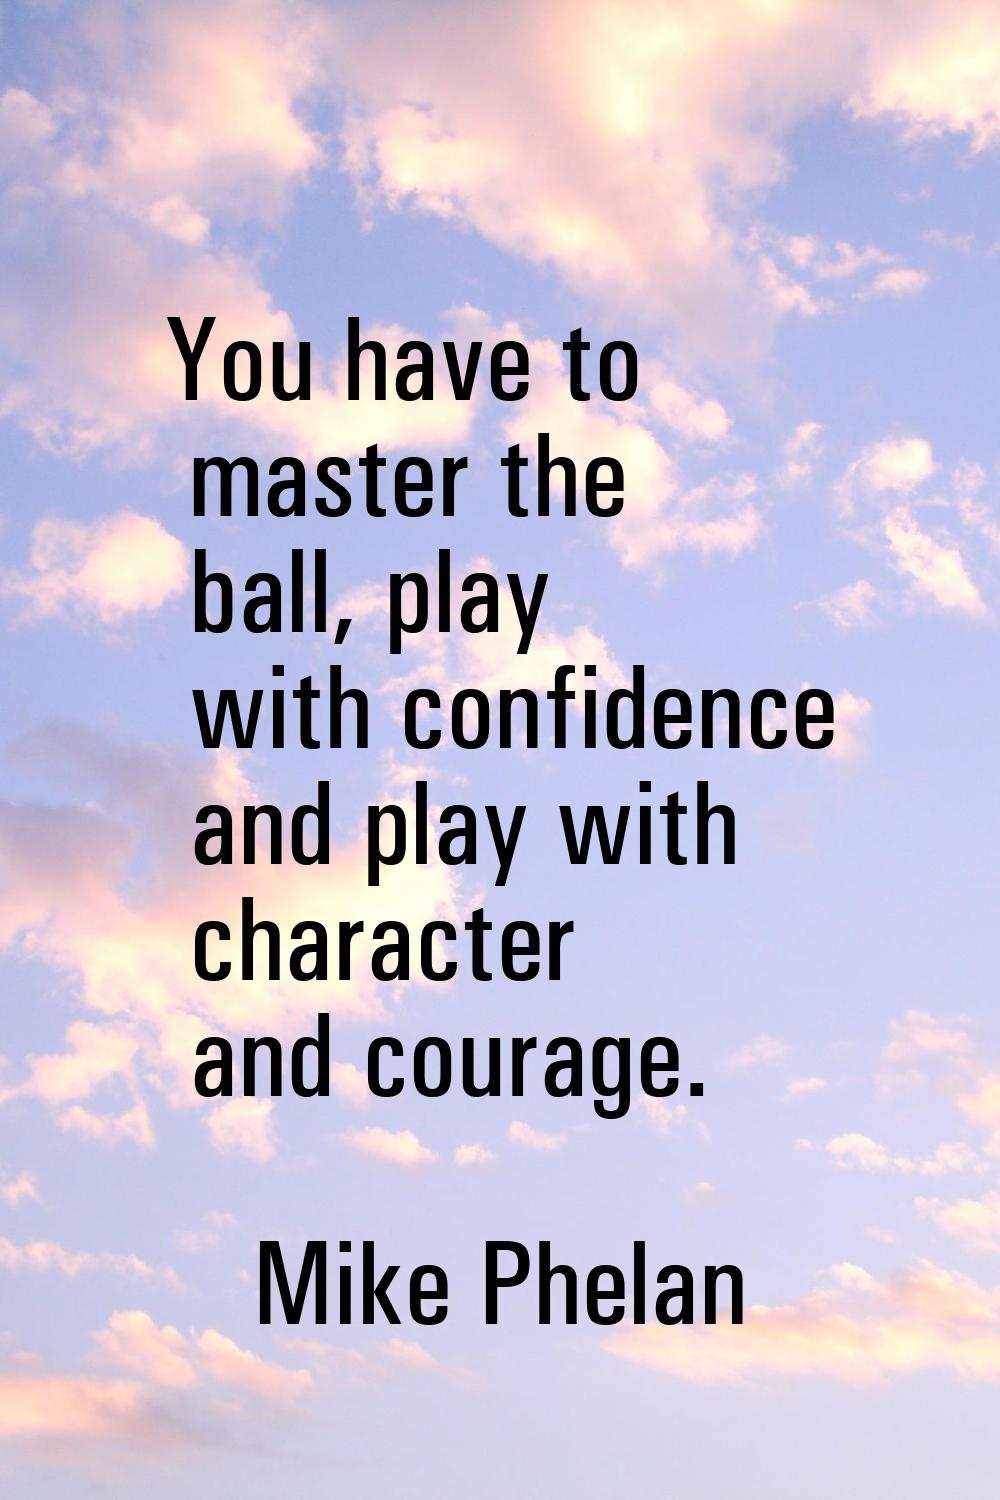 You have to master the ball, play with confidence and play with character and courage.